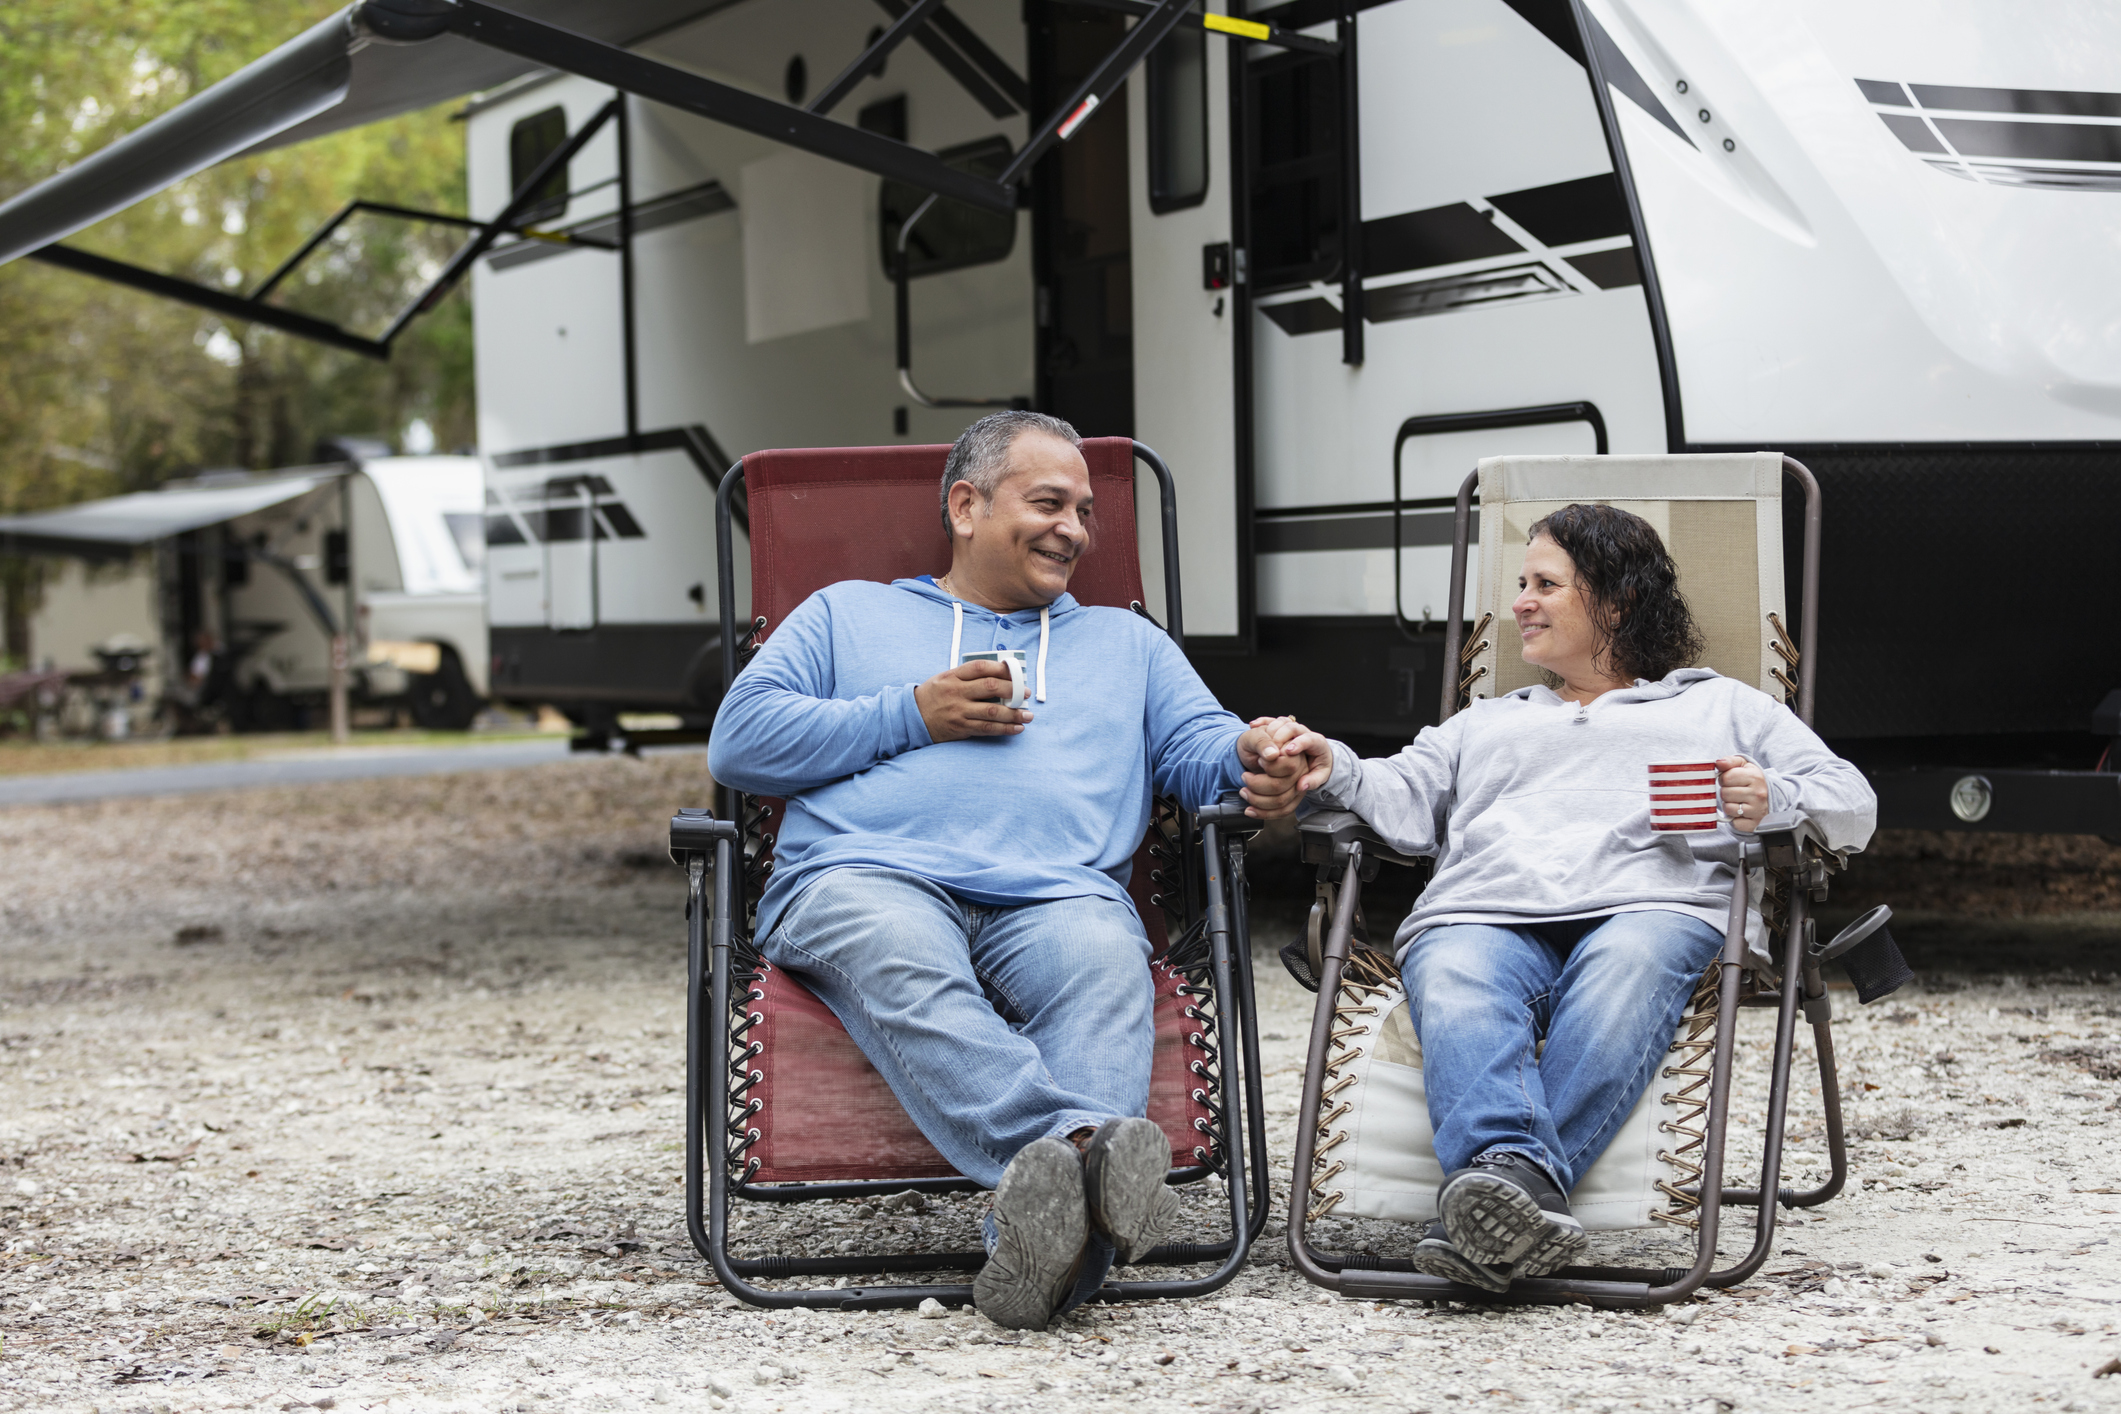 <p>Before you spend weeks on the road in an RV, consider doing a test run over a long weekend. Pick a state park or campground a few hours away from your home.</p>  <p>The advantage here is that you get to try out the RV without committing to weeks on the road. If there’s a problem, you’re still close to home and familiar resources. If there’s a mechanical issue, you aren’t stranded in the desert or far from a town.</p>  <p><b>Related:</b> <a href="https://blog.cheapism.com/rv-drivers-rookie-mistakes/">Rookie Mistakes That First-Time RV Drivers Make</a></p><p><b><a href="https://www.msn.com/en-us/community/channel/vid-grbb4nxka360magbjttibd6ag5d9vsc2eppivaurpdsay52wkpfs?ocid=sp" data-original-title="" title="">Follow us on MSN</a> for more of the content you love.</b></p>